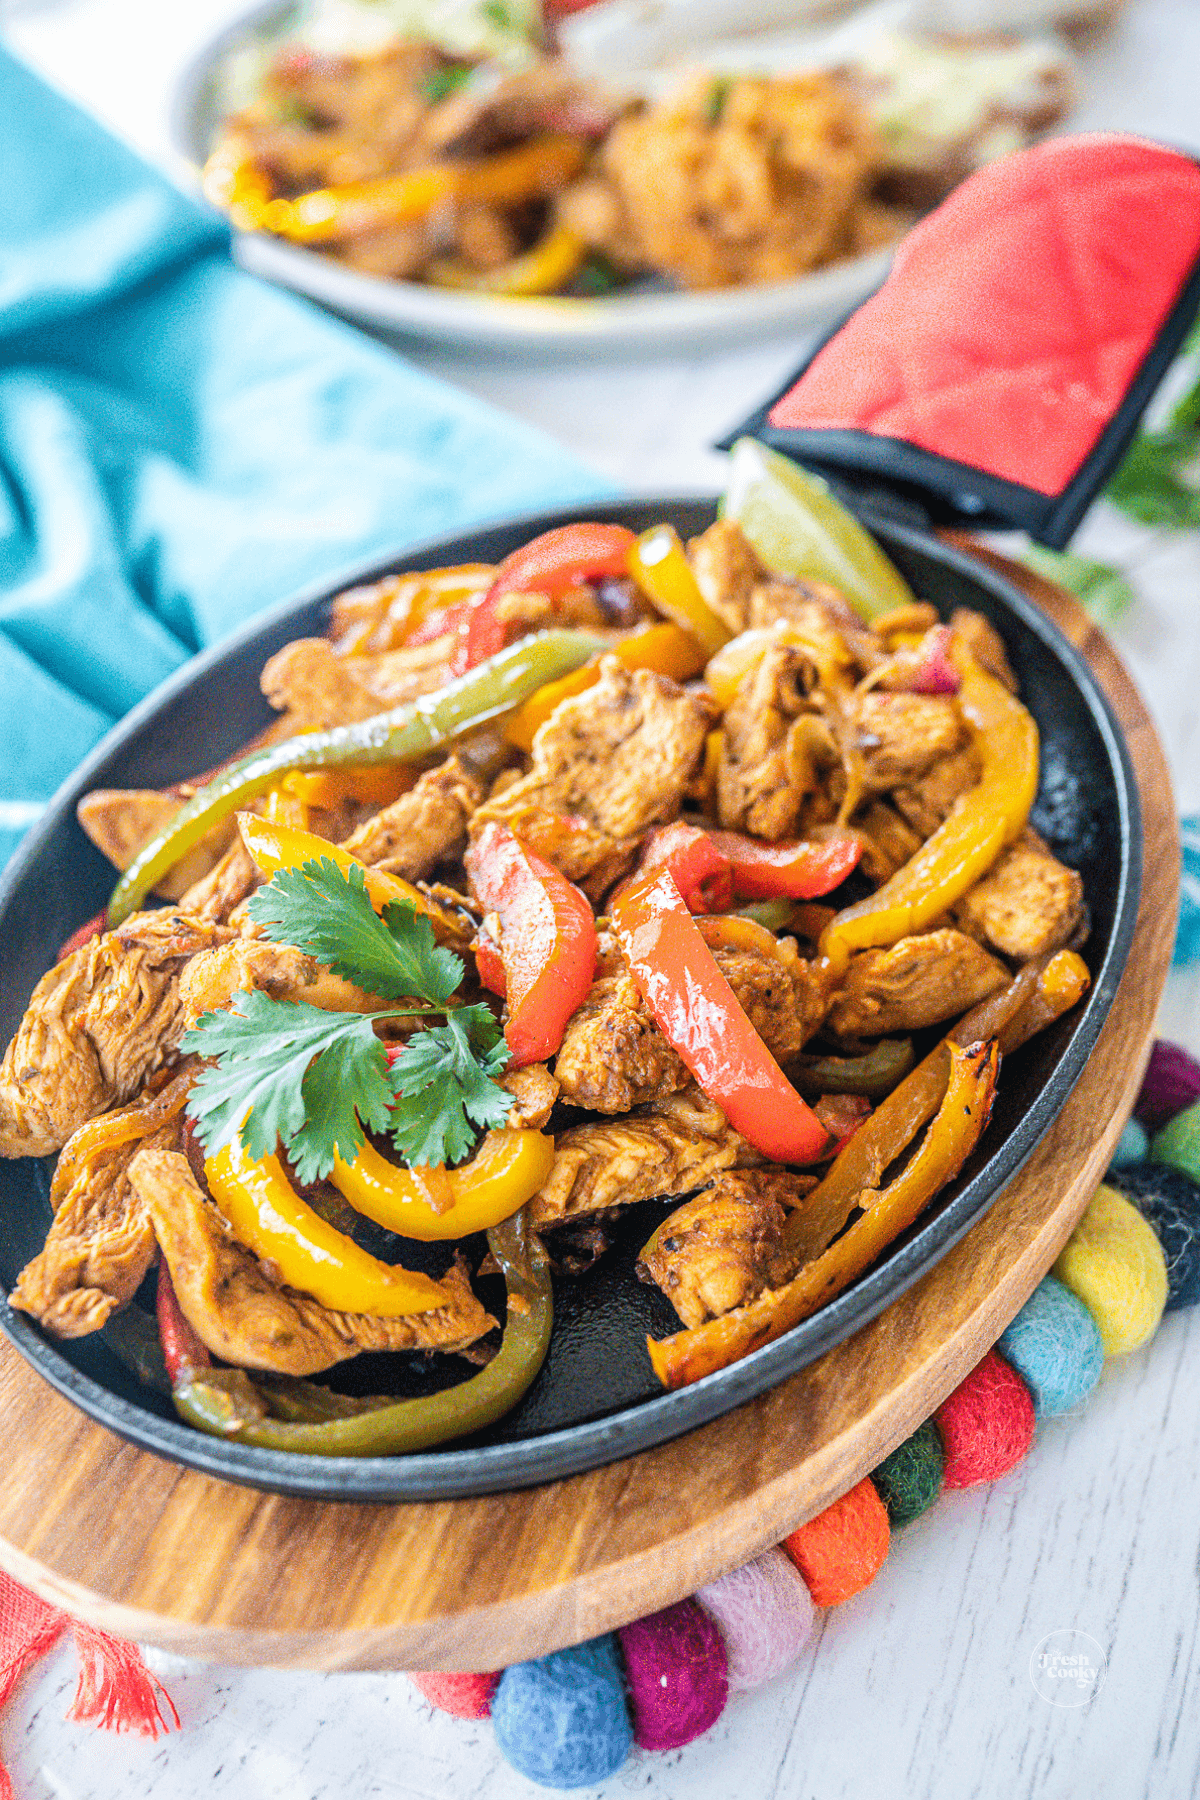 Sizzling skillet filled with Mexican chicken fajitas with sides in background.